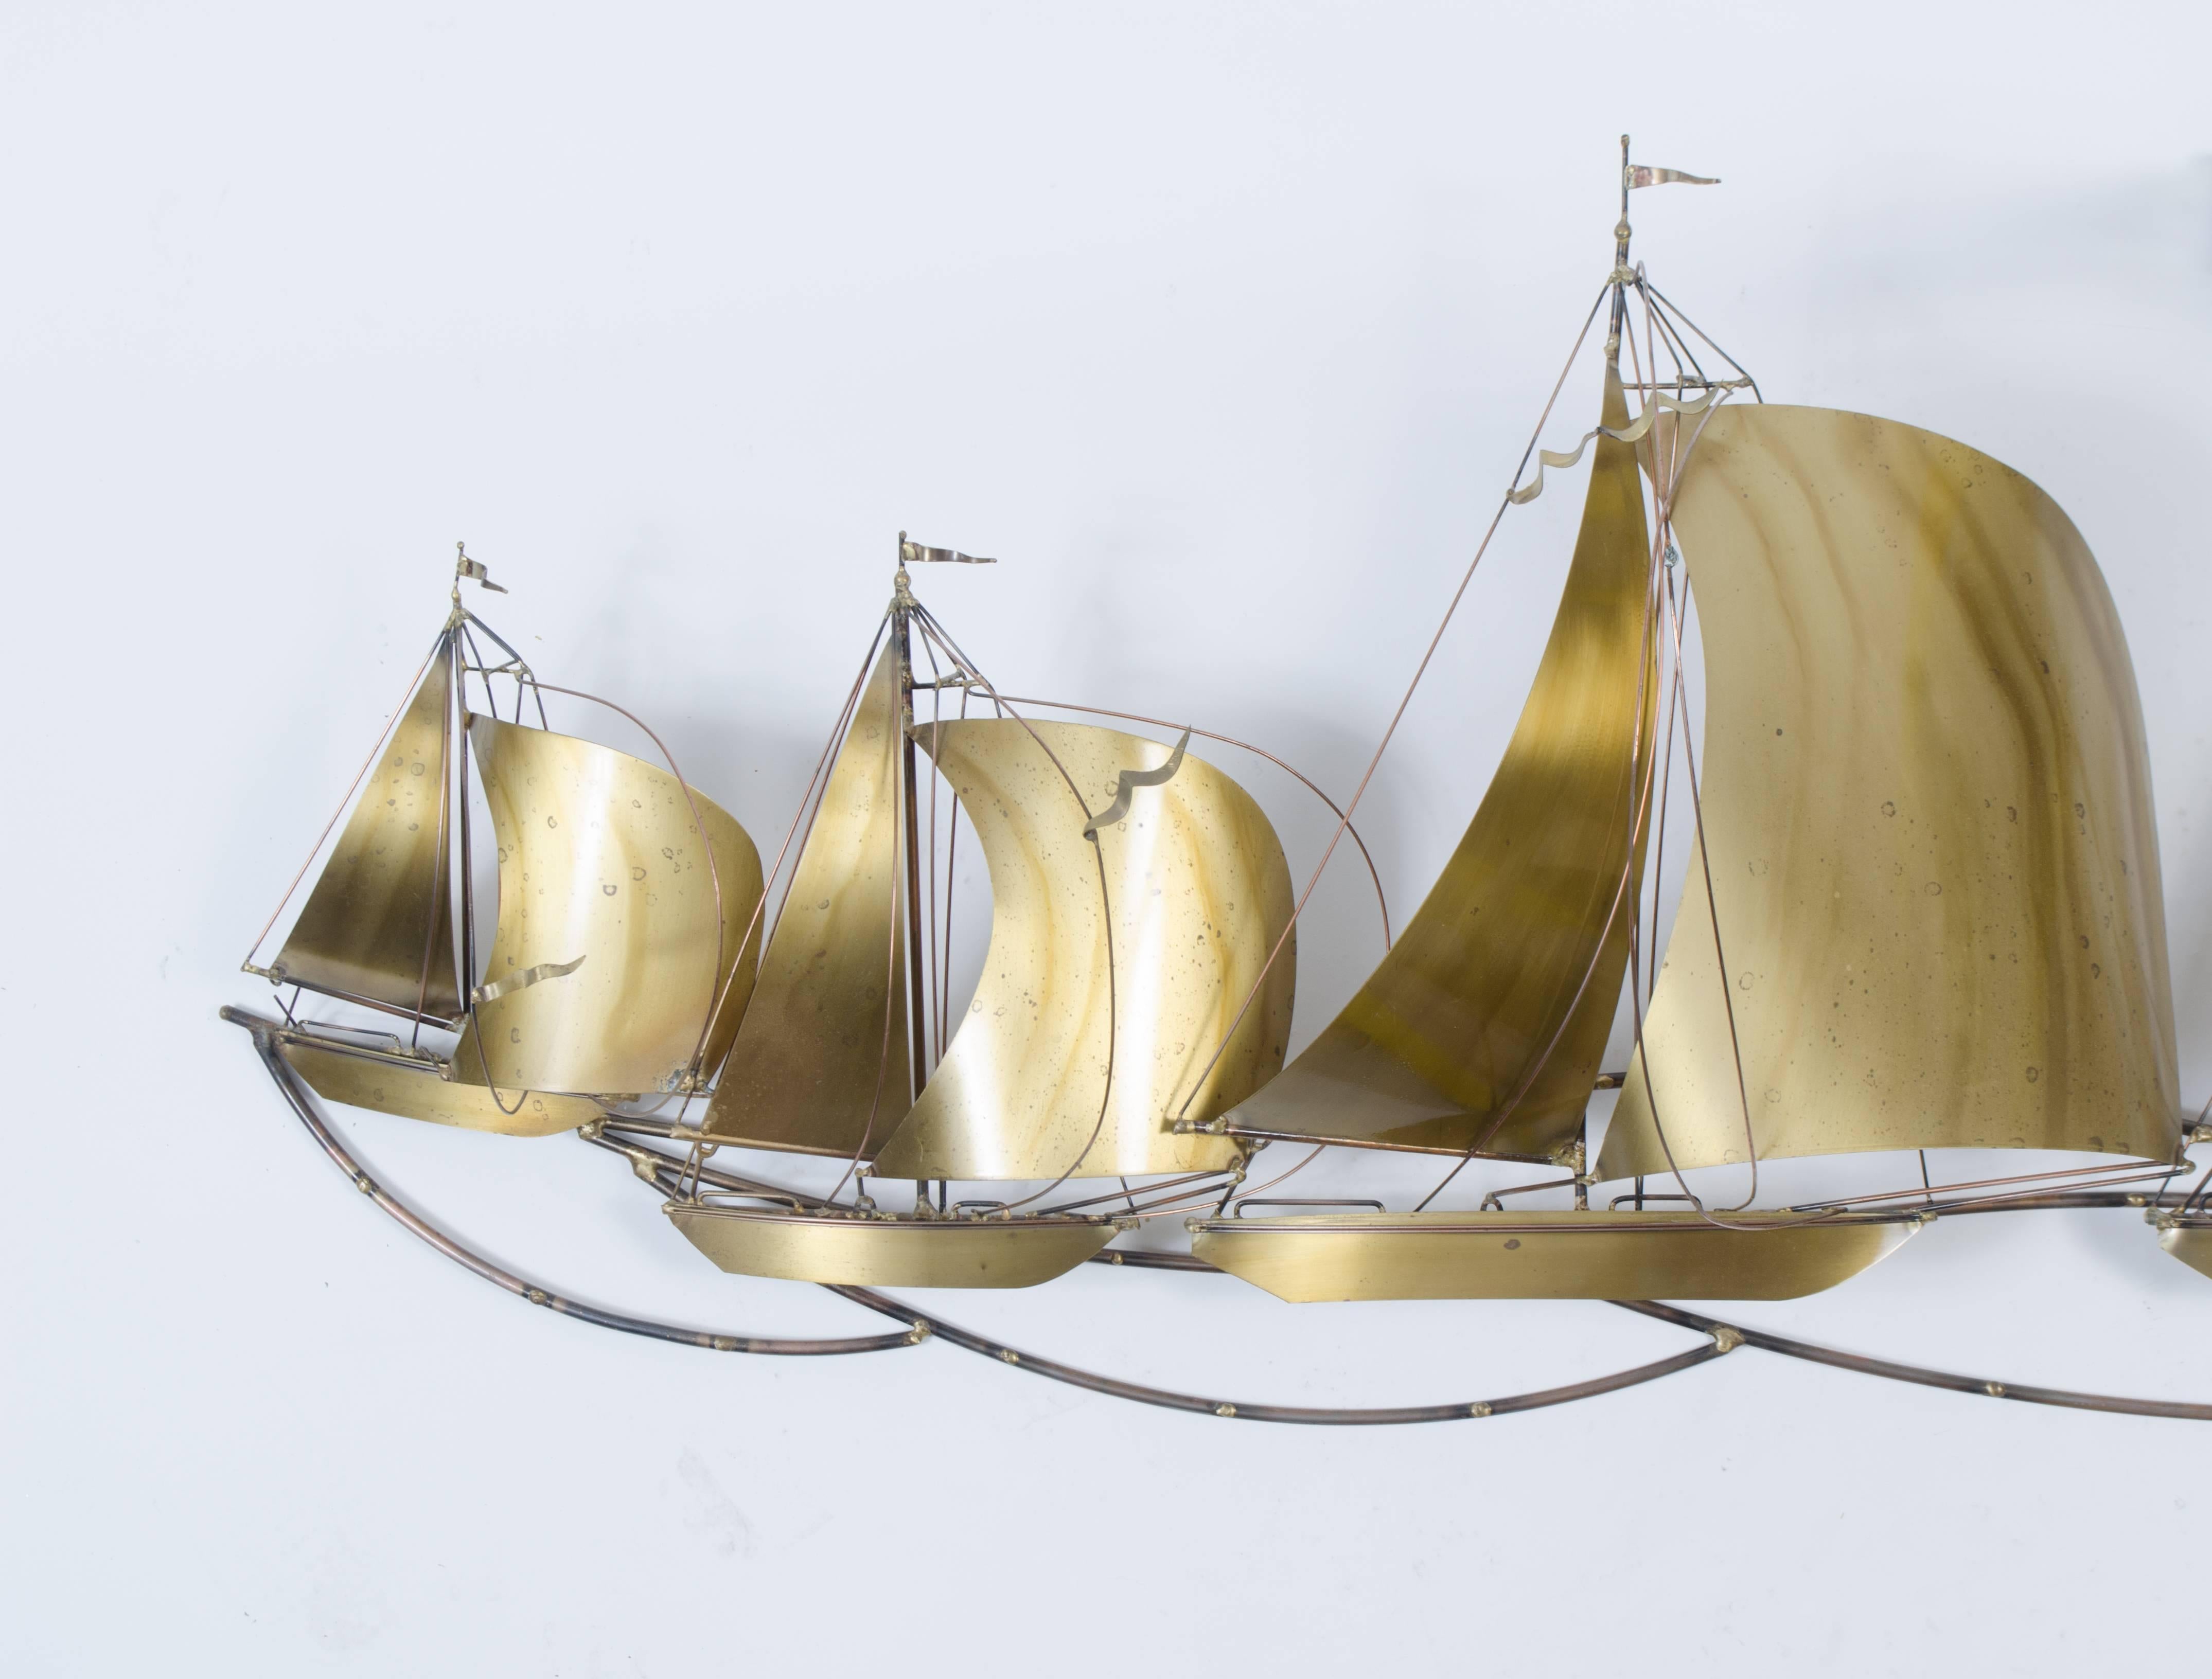 Capturing the moment of a bustling sail ship regatta, expertly done by C. Jere as expected. Five ships crafted from brass frozen in space, some near and some far. A wonderful wall mount with splendid visual movement.